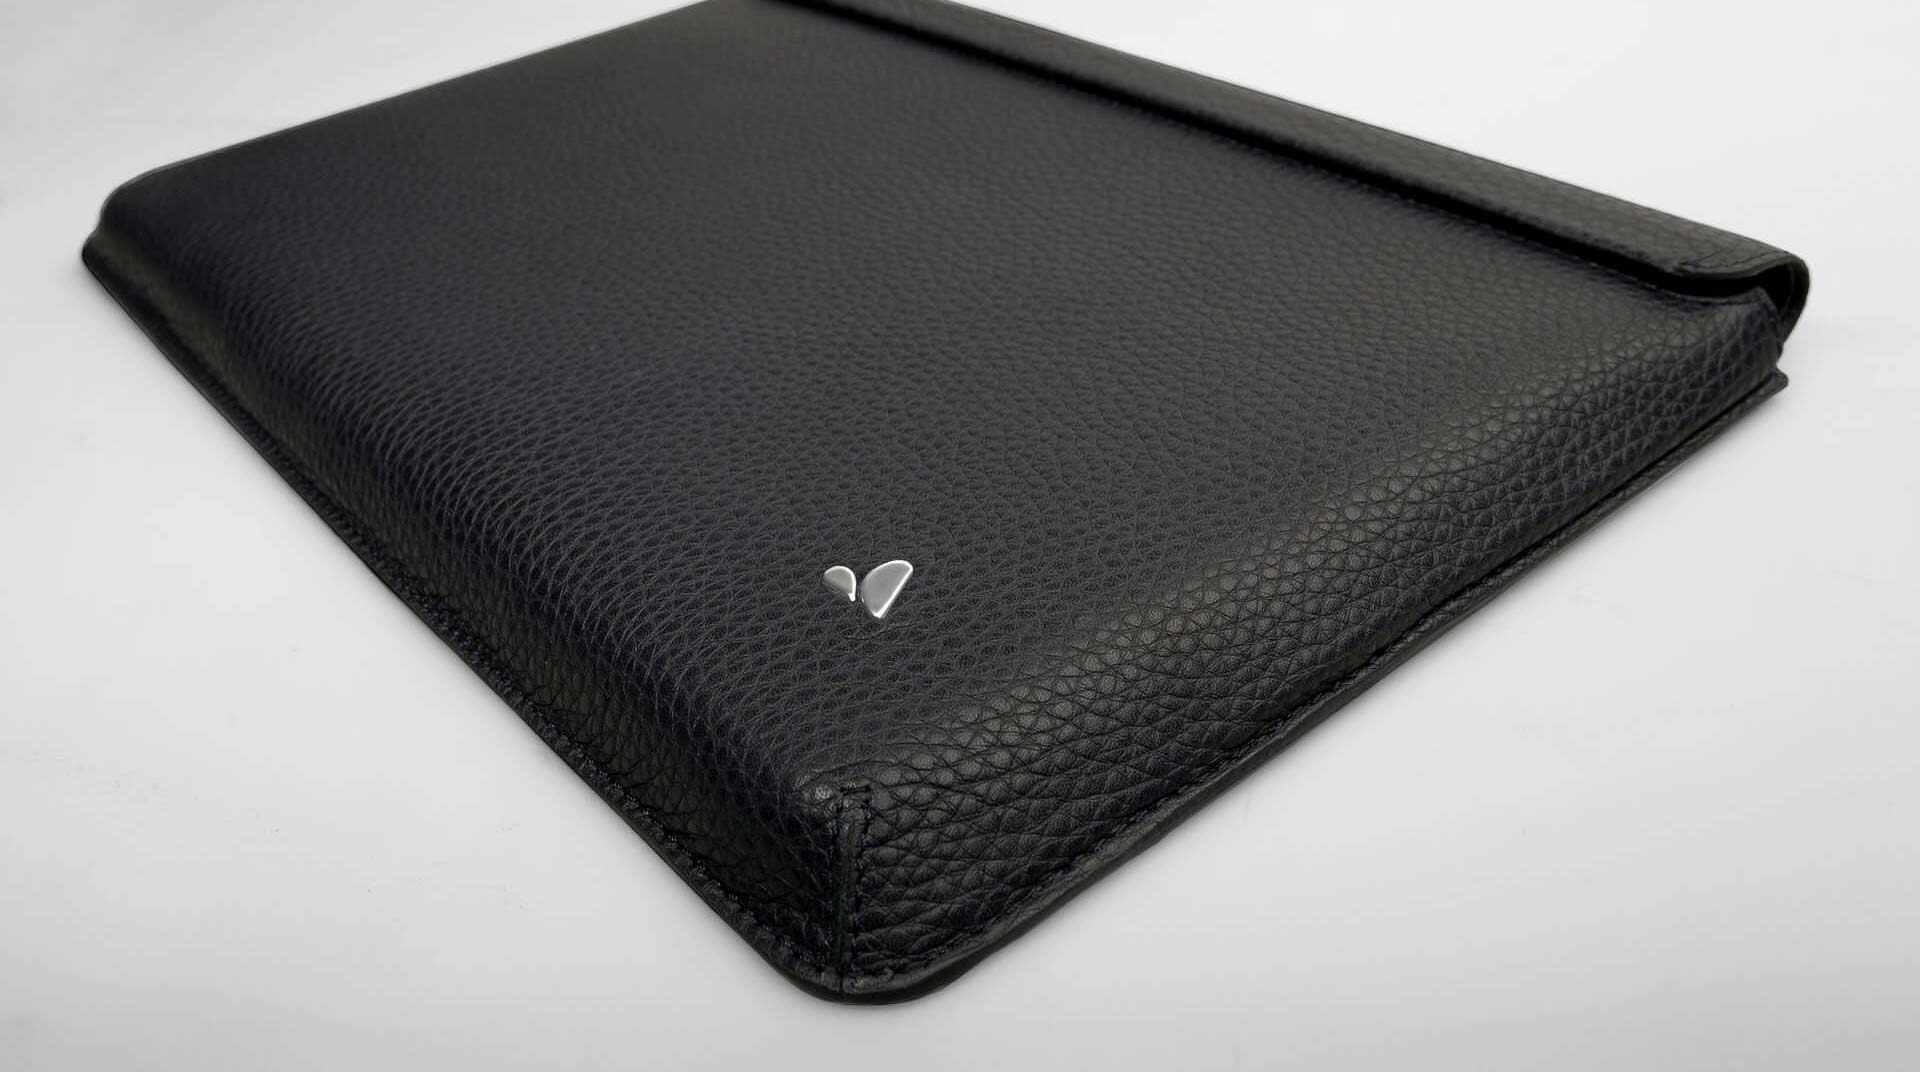 Stylish Leather MacBook Pro Cases to Show Off at Your Next Meeting